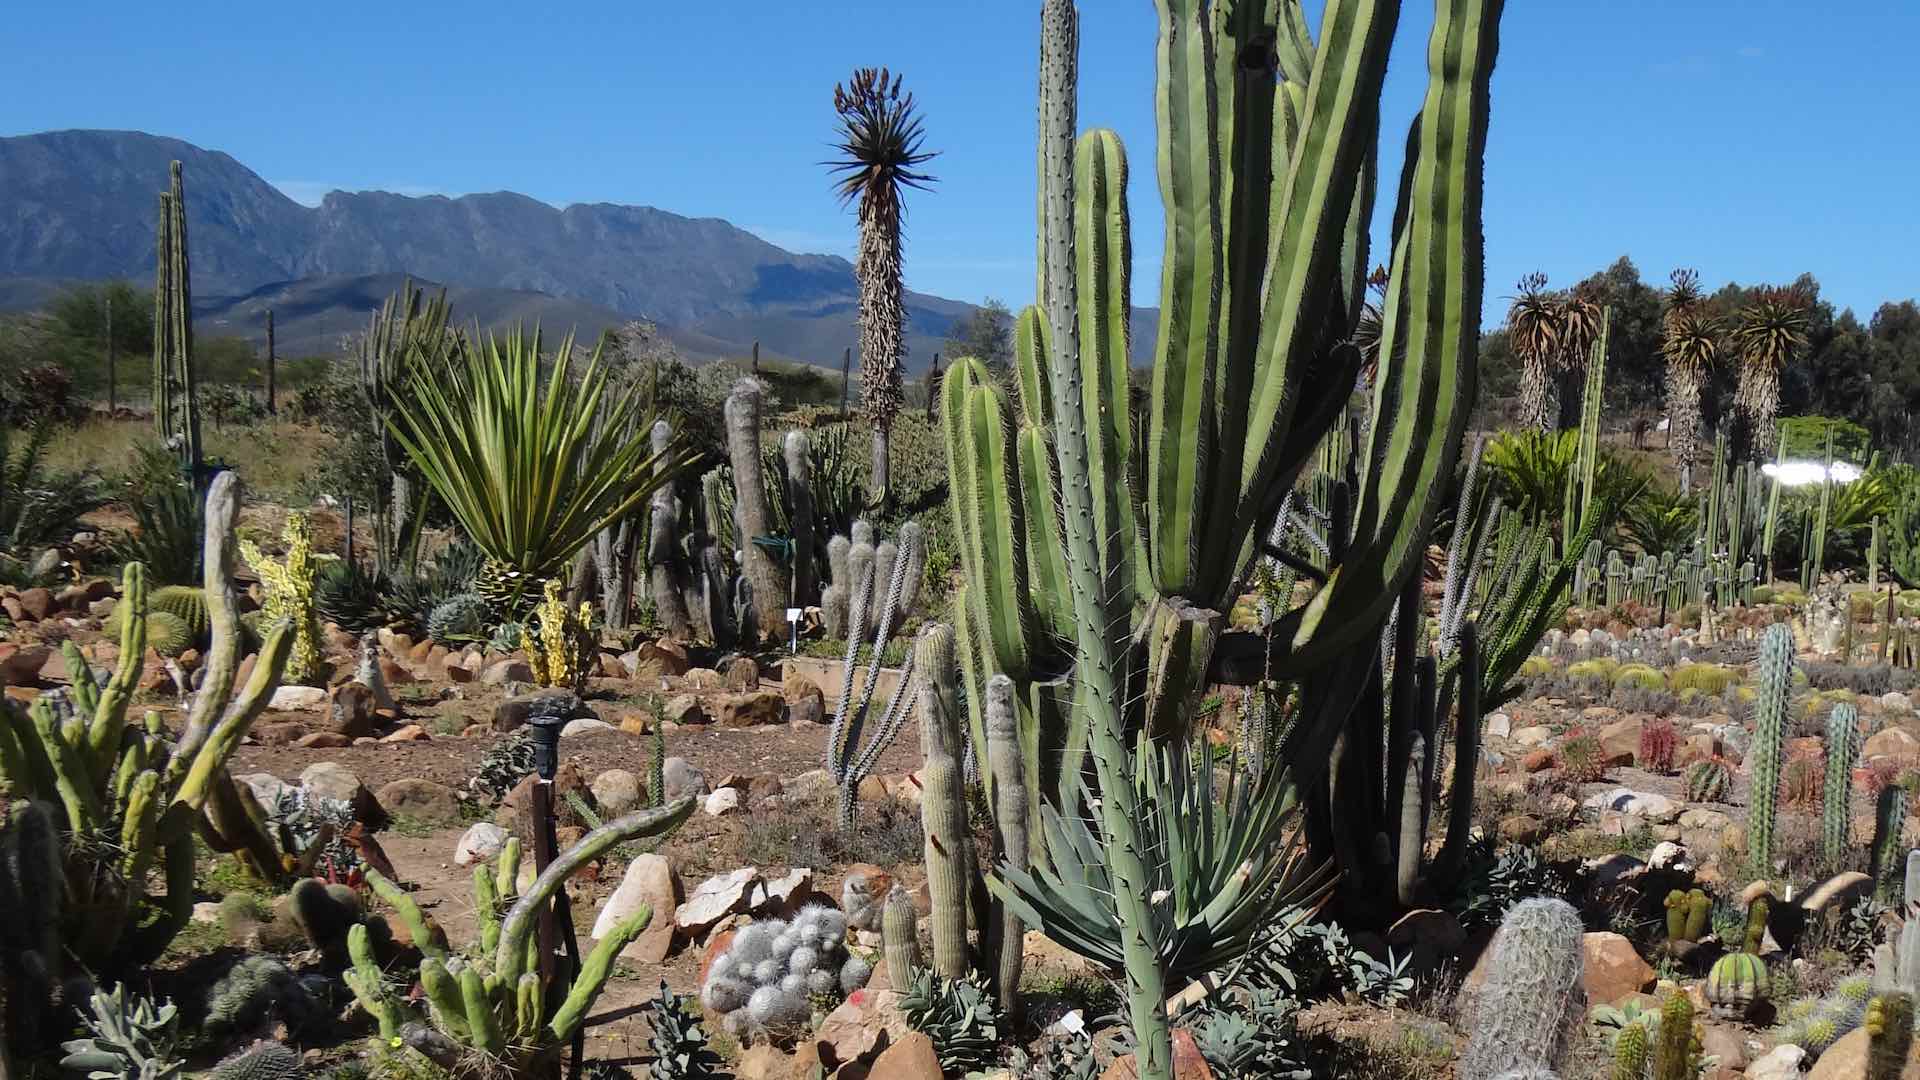 Cactus farm with various types of cacti